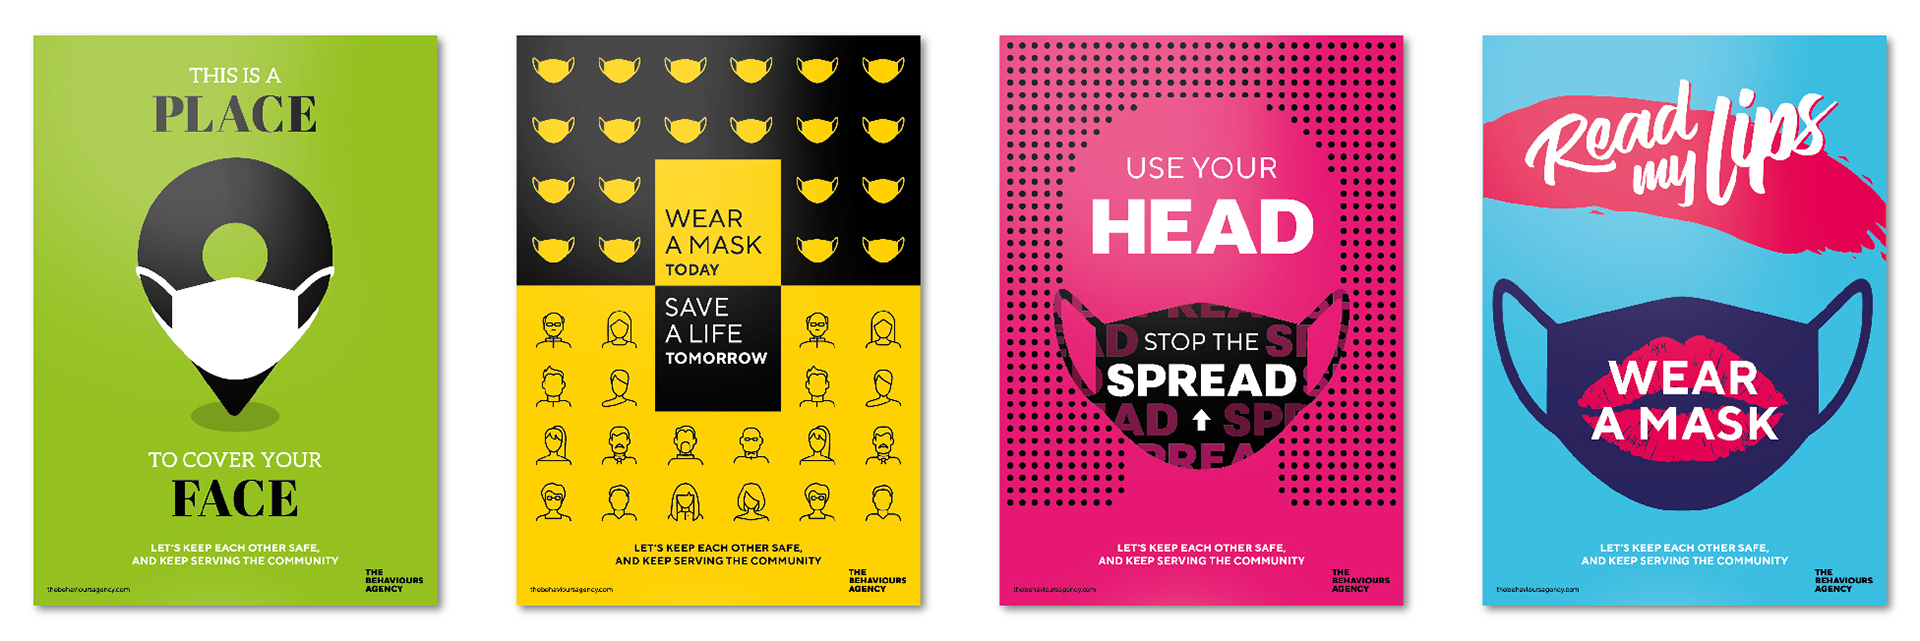 Behavioural Mask Posters for retailers